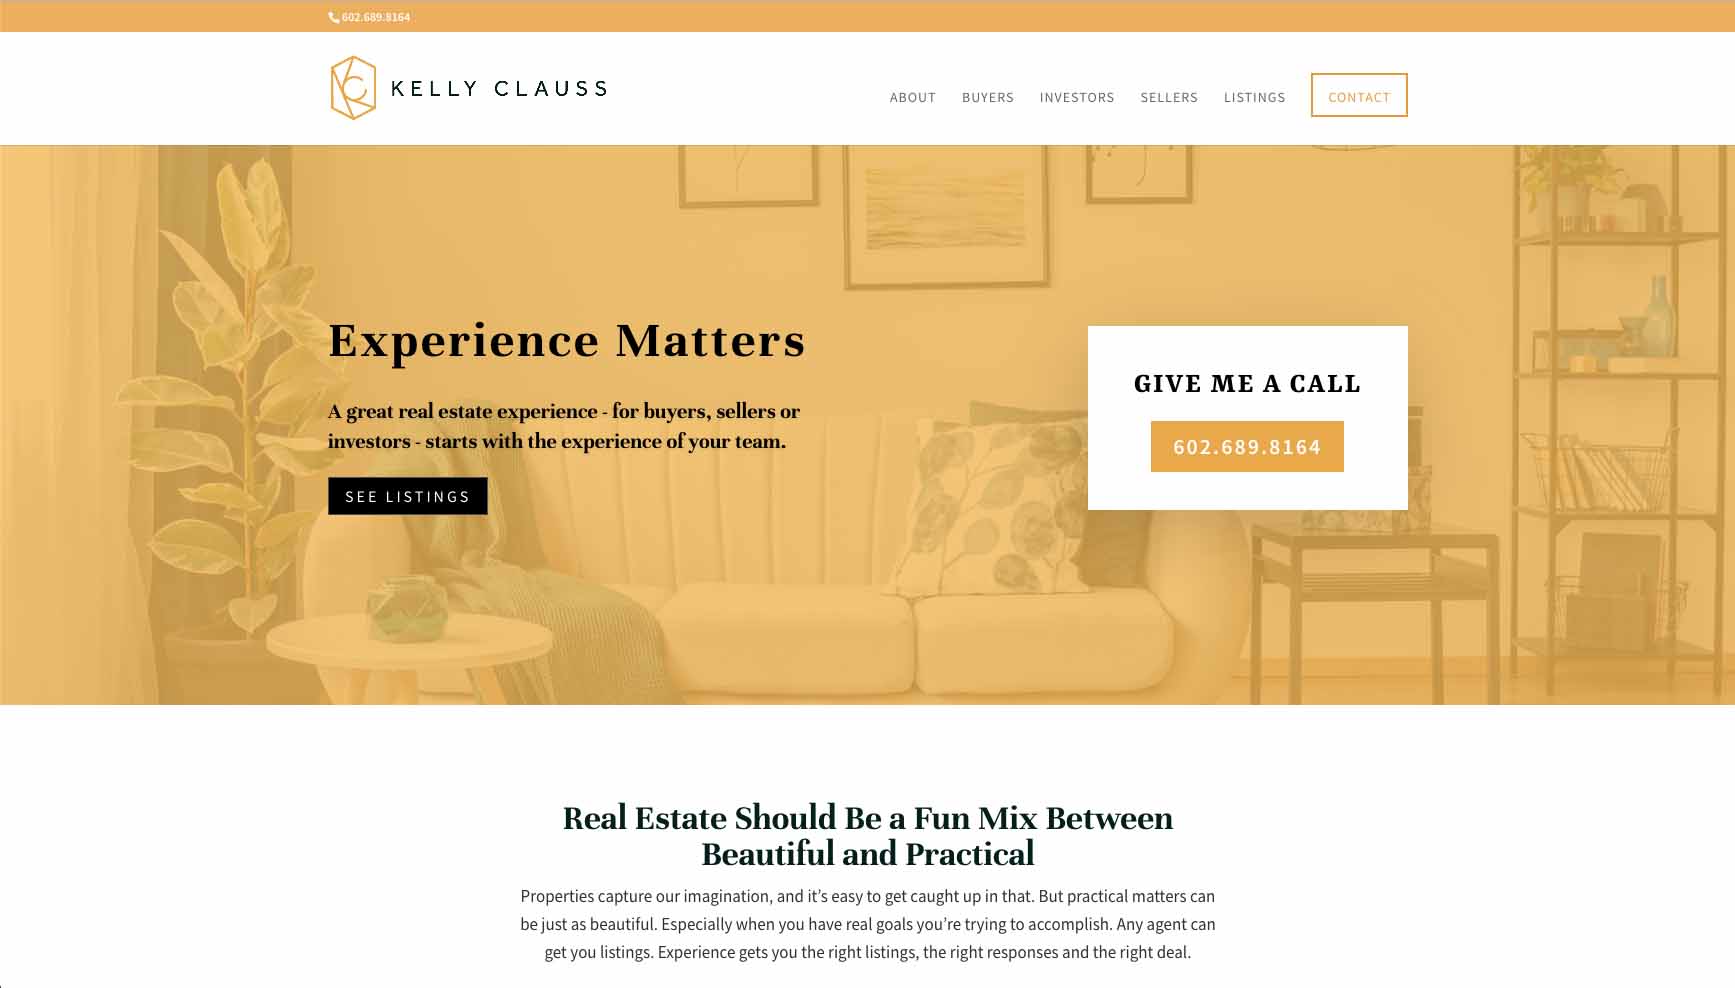 A Website to Make Your Real Estate Brand Stand Out